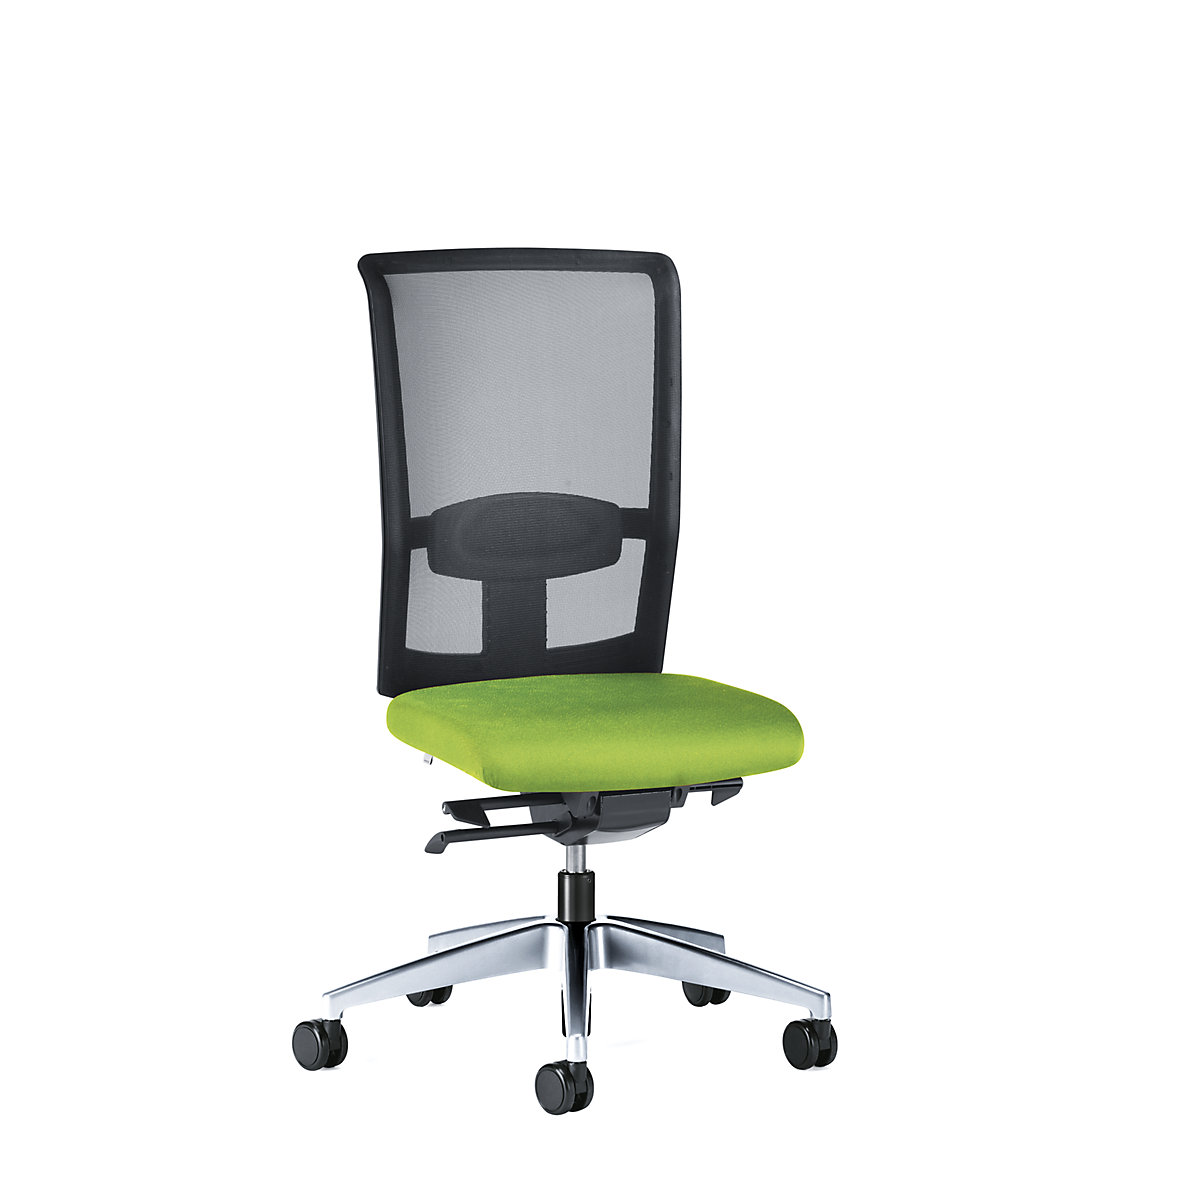 GOAL AIR office swivel chair, back rest height 545 mm – interstuhl, polished frame, with hard castors, yellow green, seat depth 410 mm-1